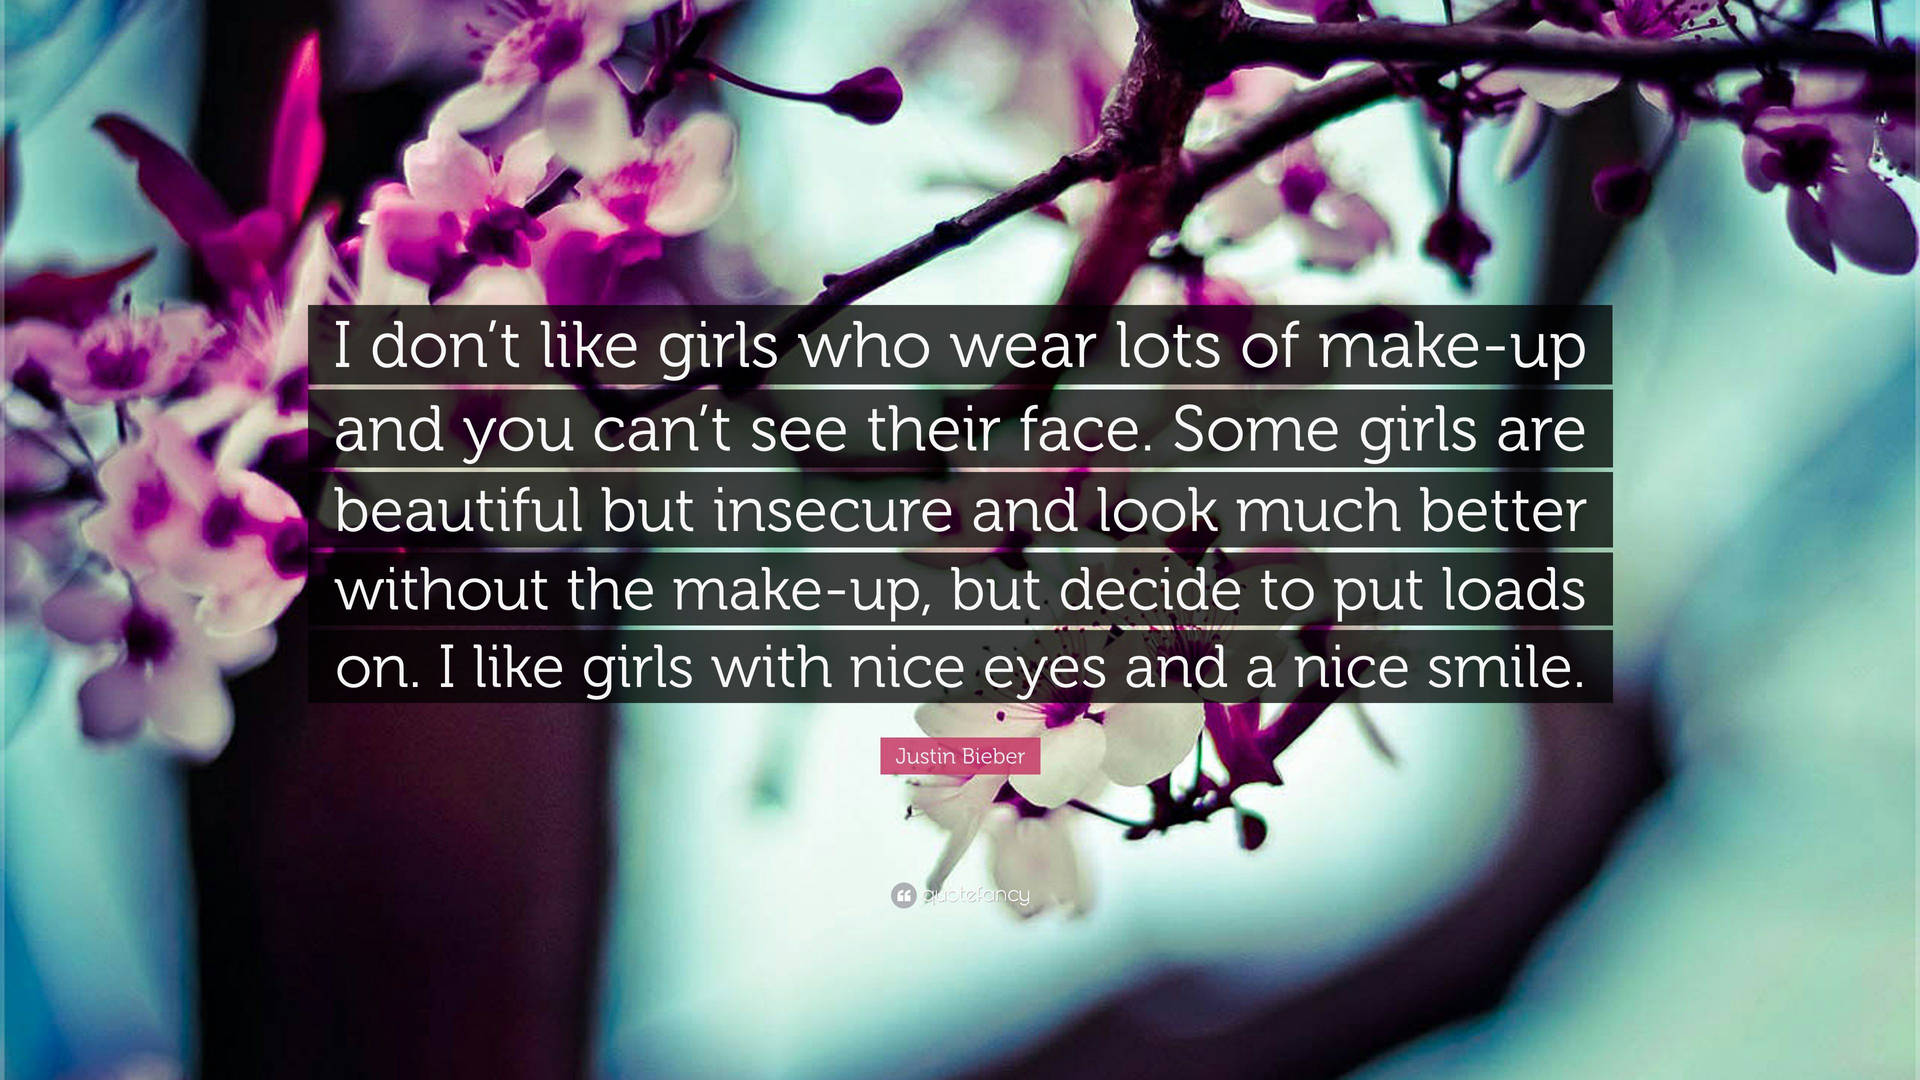 Justin Bieber Quote About Being Insecure Background